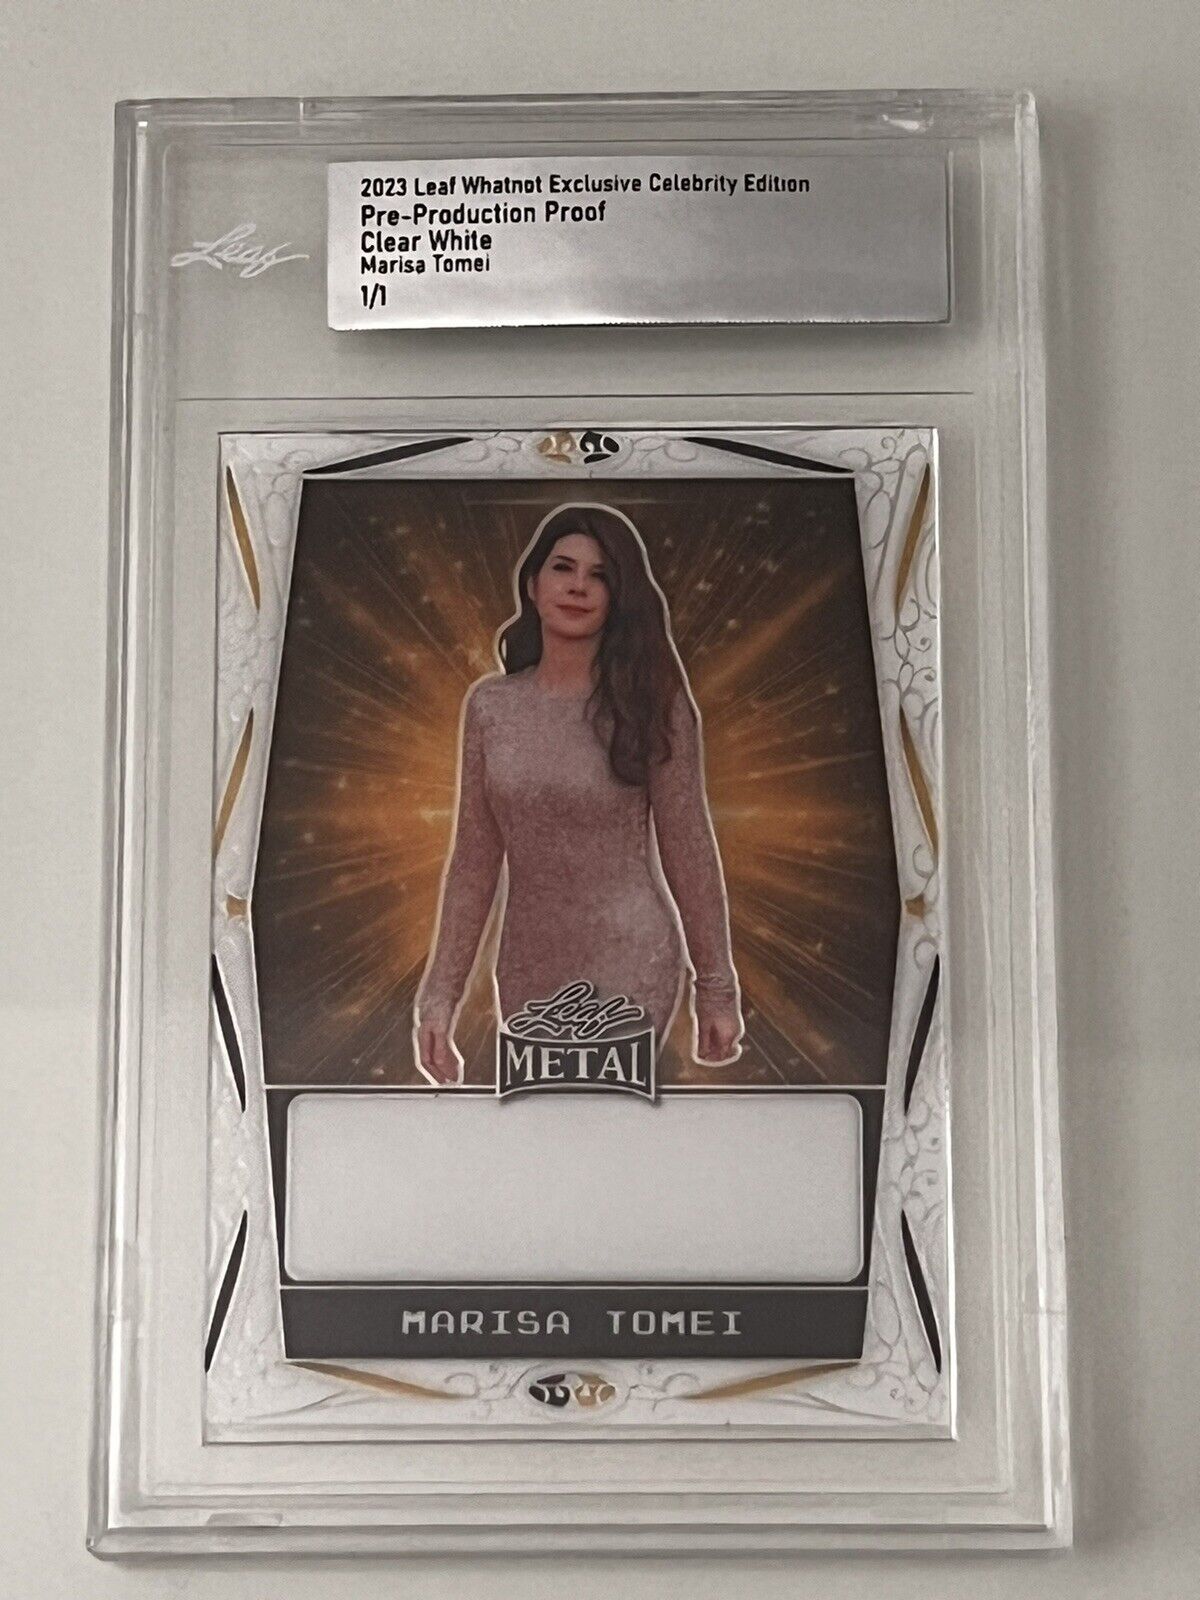 2023 Leaf Whatnot Exclusive Celebrity Edition Marisa Tomei Clear White 1/1